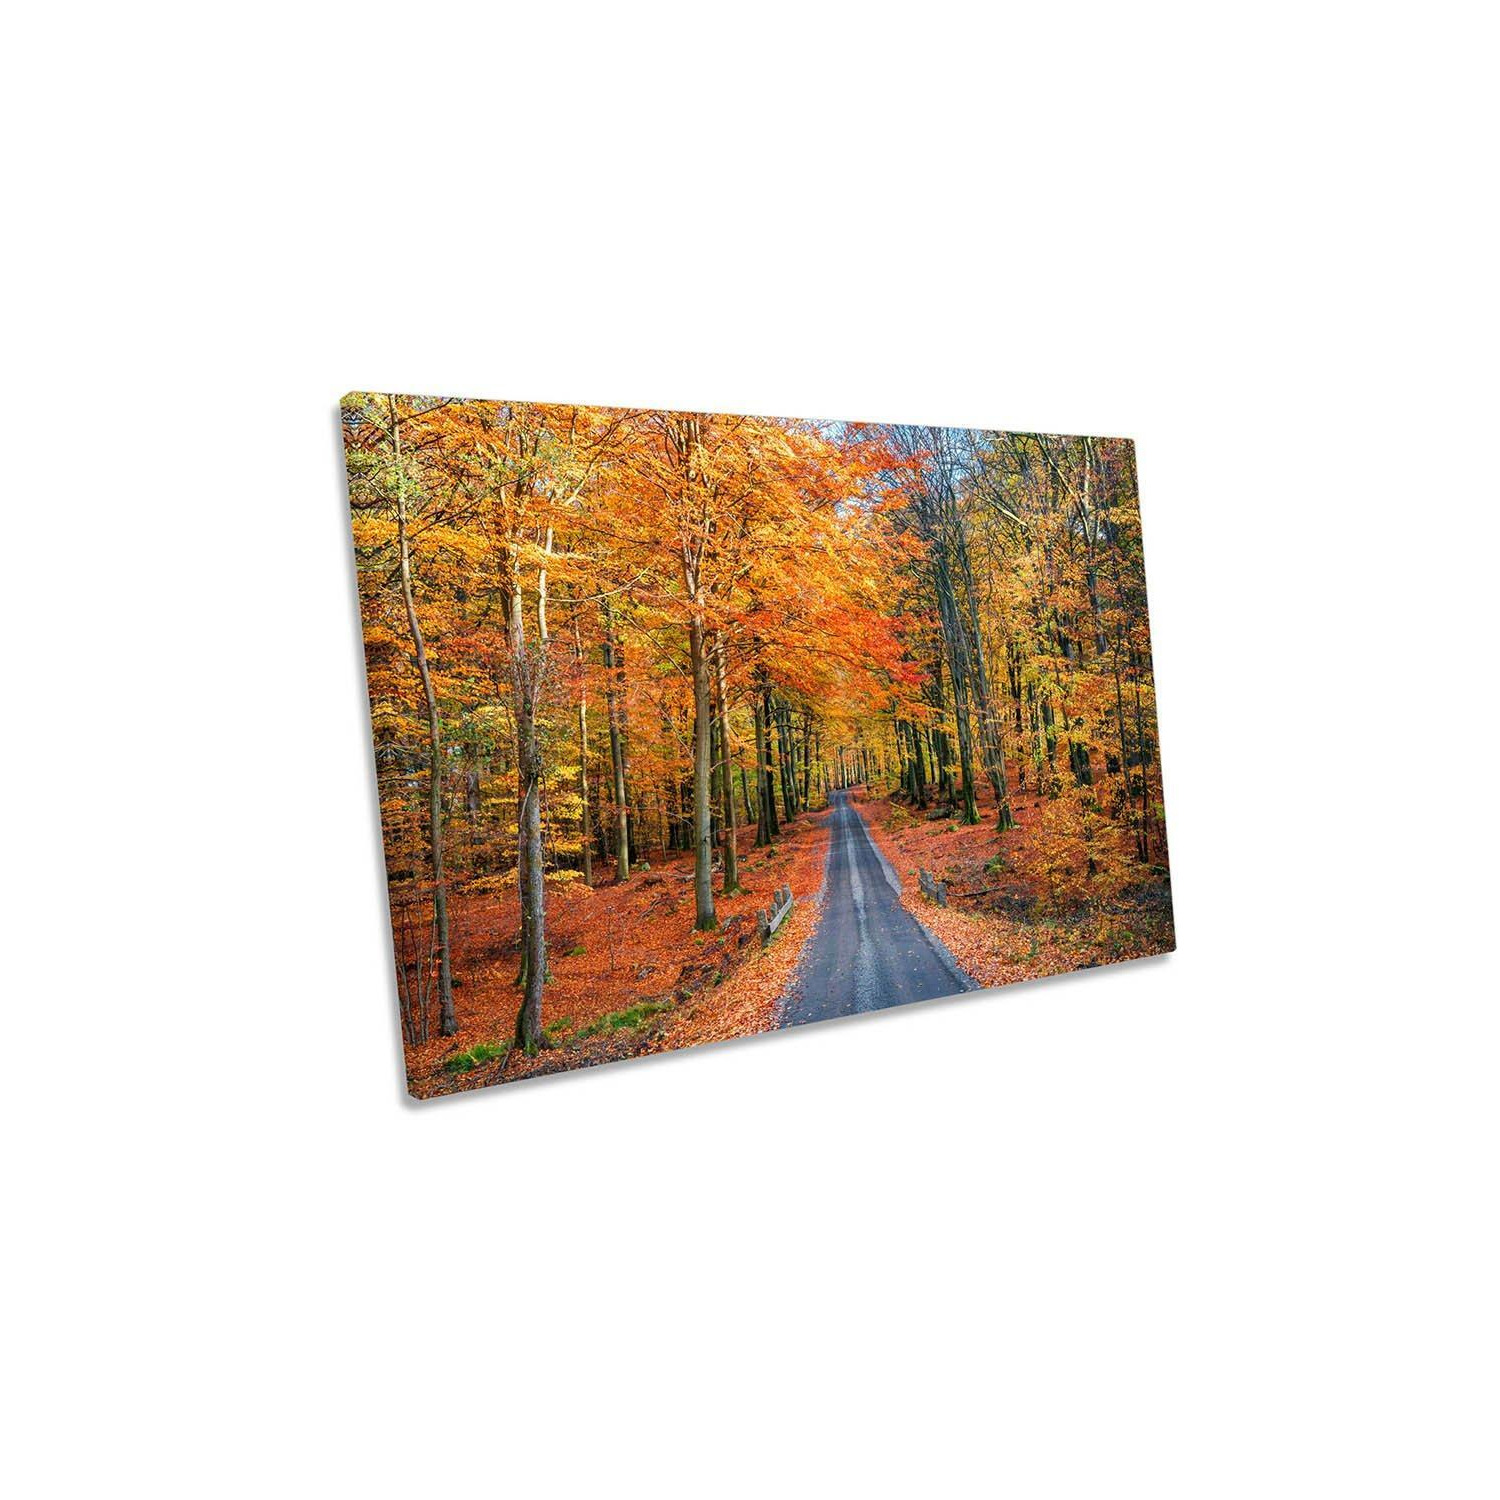 Road into Autumn Forest Orange Canvas Wall Art Picture Print - image 1